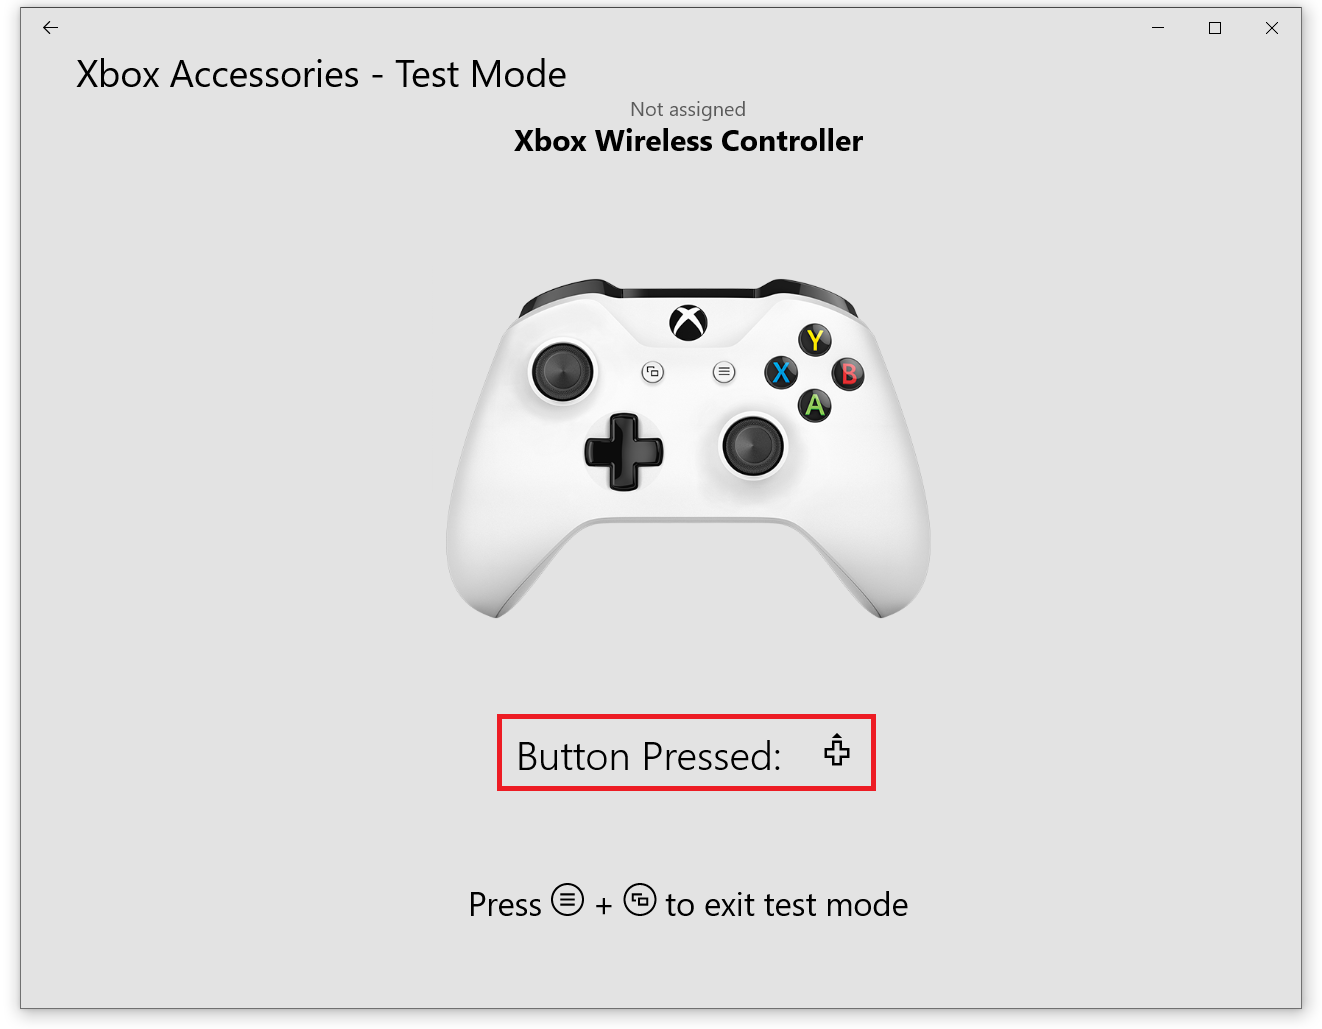 How to Calibrate Xbox One Controller?